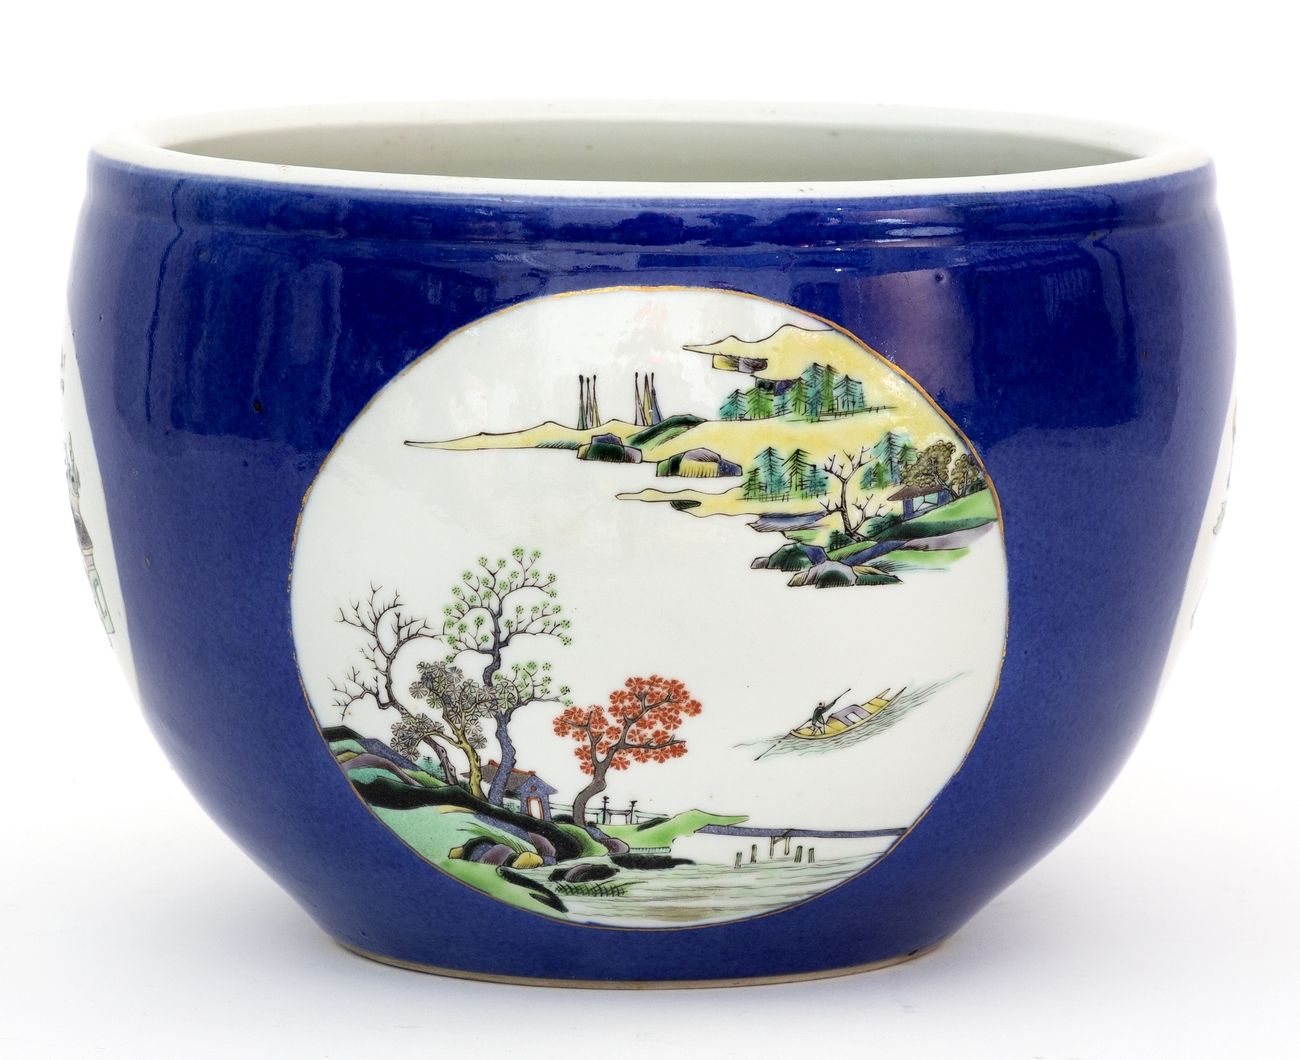 Null China, 19th century
Porcelain cover-pot decorated with landscapes in cartou&hellip;